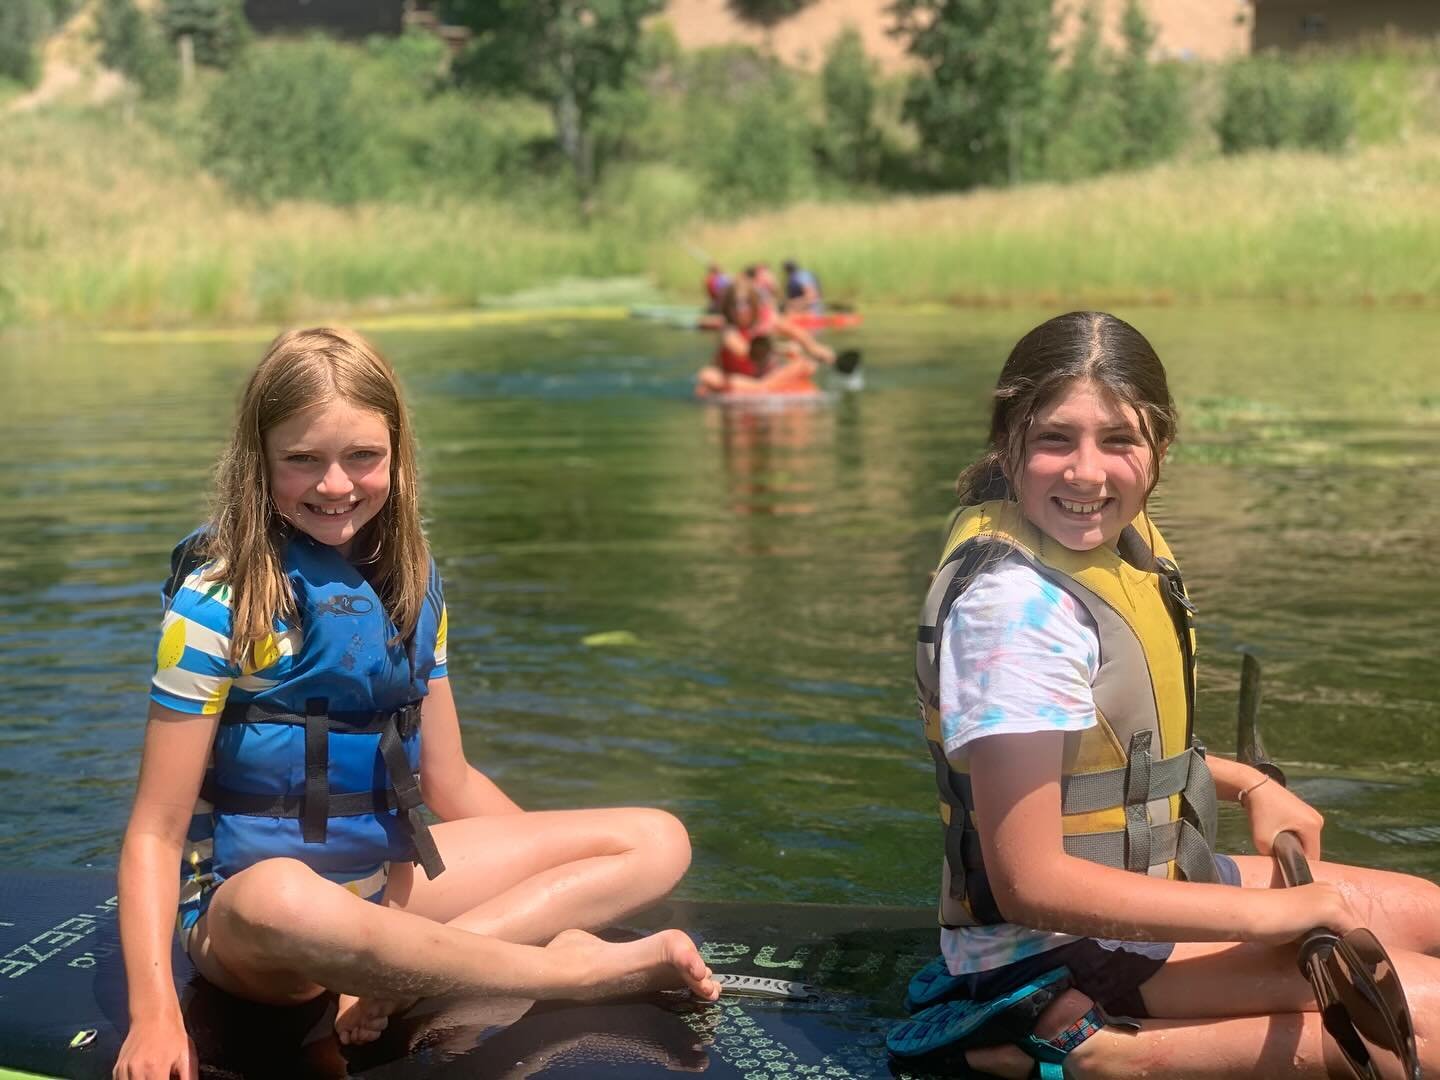 Getting ready for summer!! ONE MONTH until the ultimate summer adventure starts! 

We still have spaces available in June. Reserve your June dates today!!

#ajaxadventurecamp #ajaxcamp #summercamp #slipandslide #aspen #colorado #aspenco